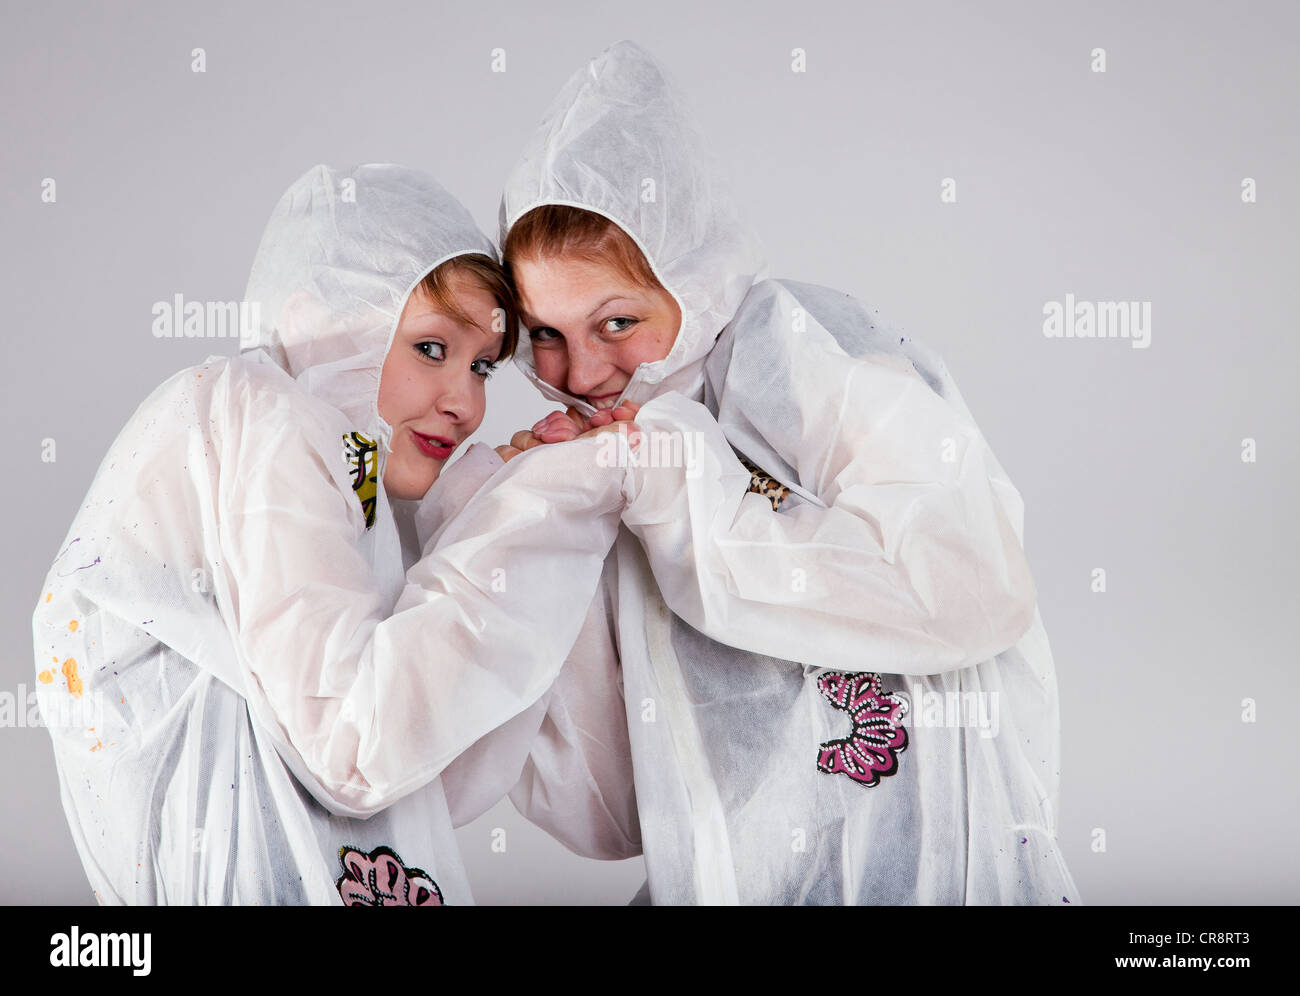 Cheeky girls wearing white protective suits Stock Photo